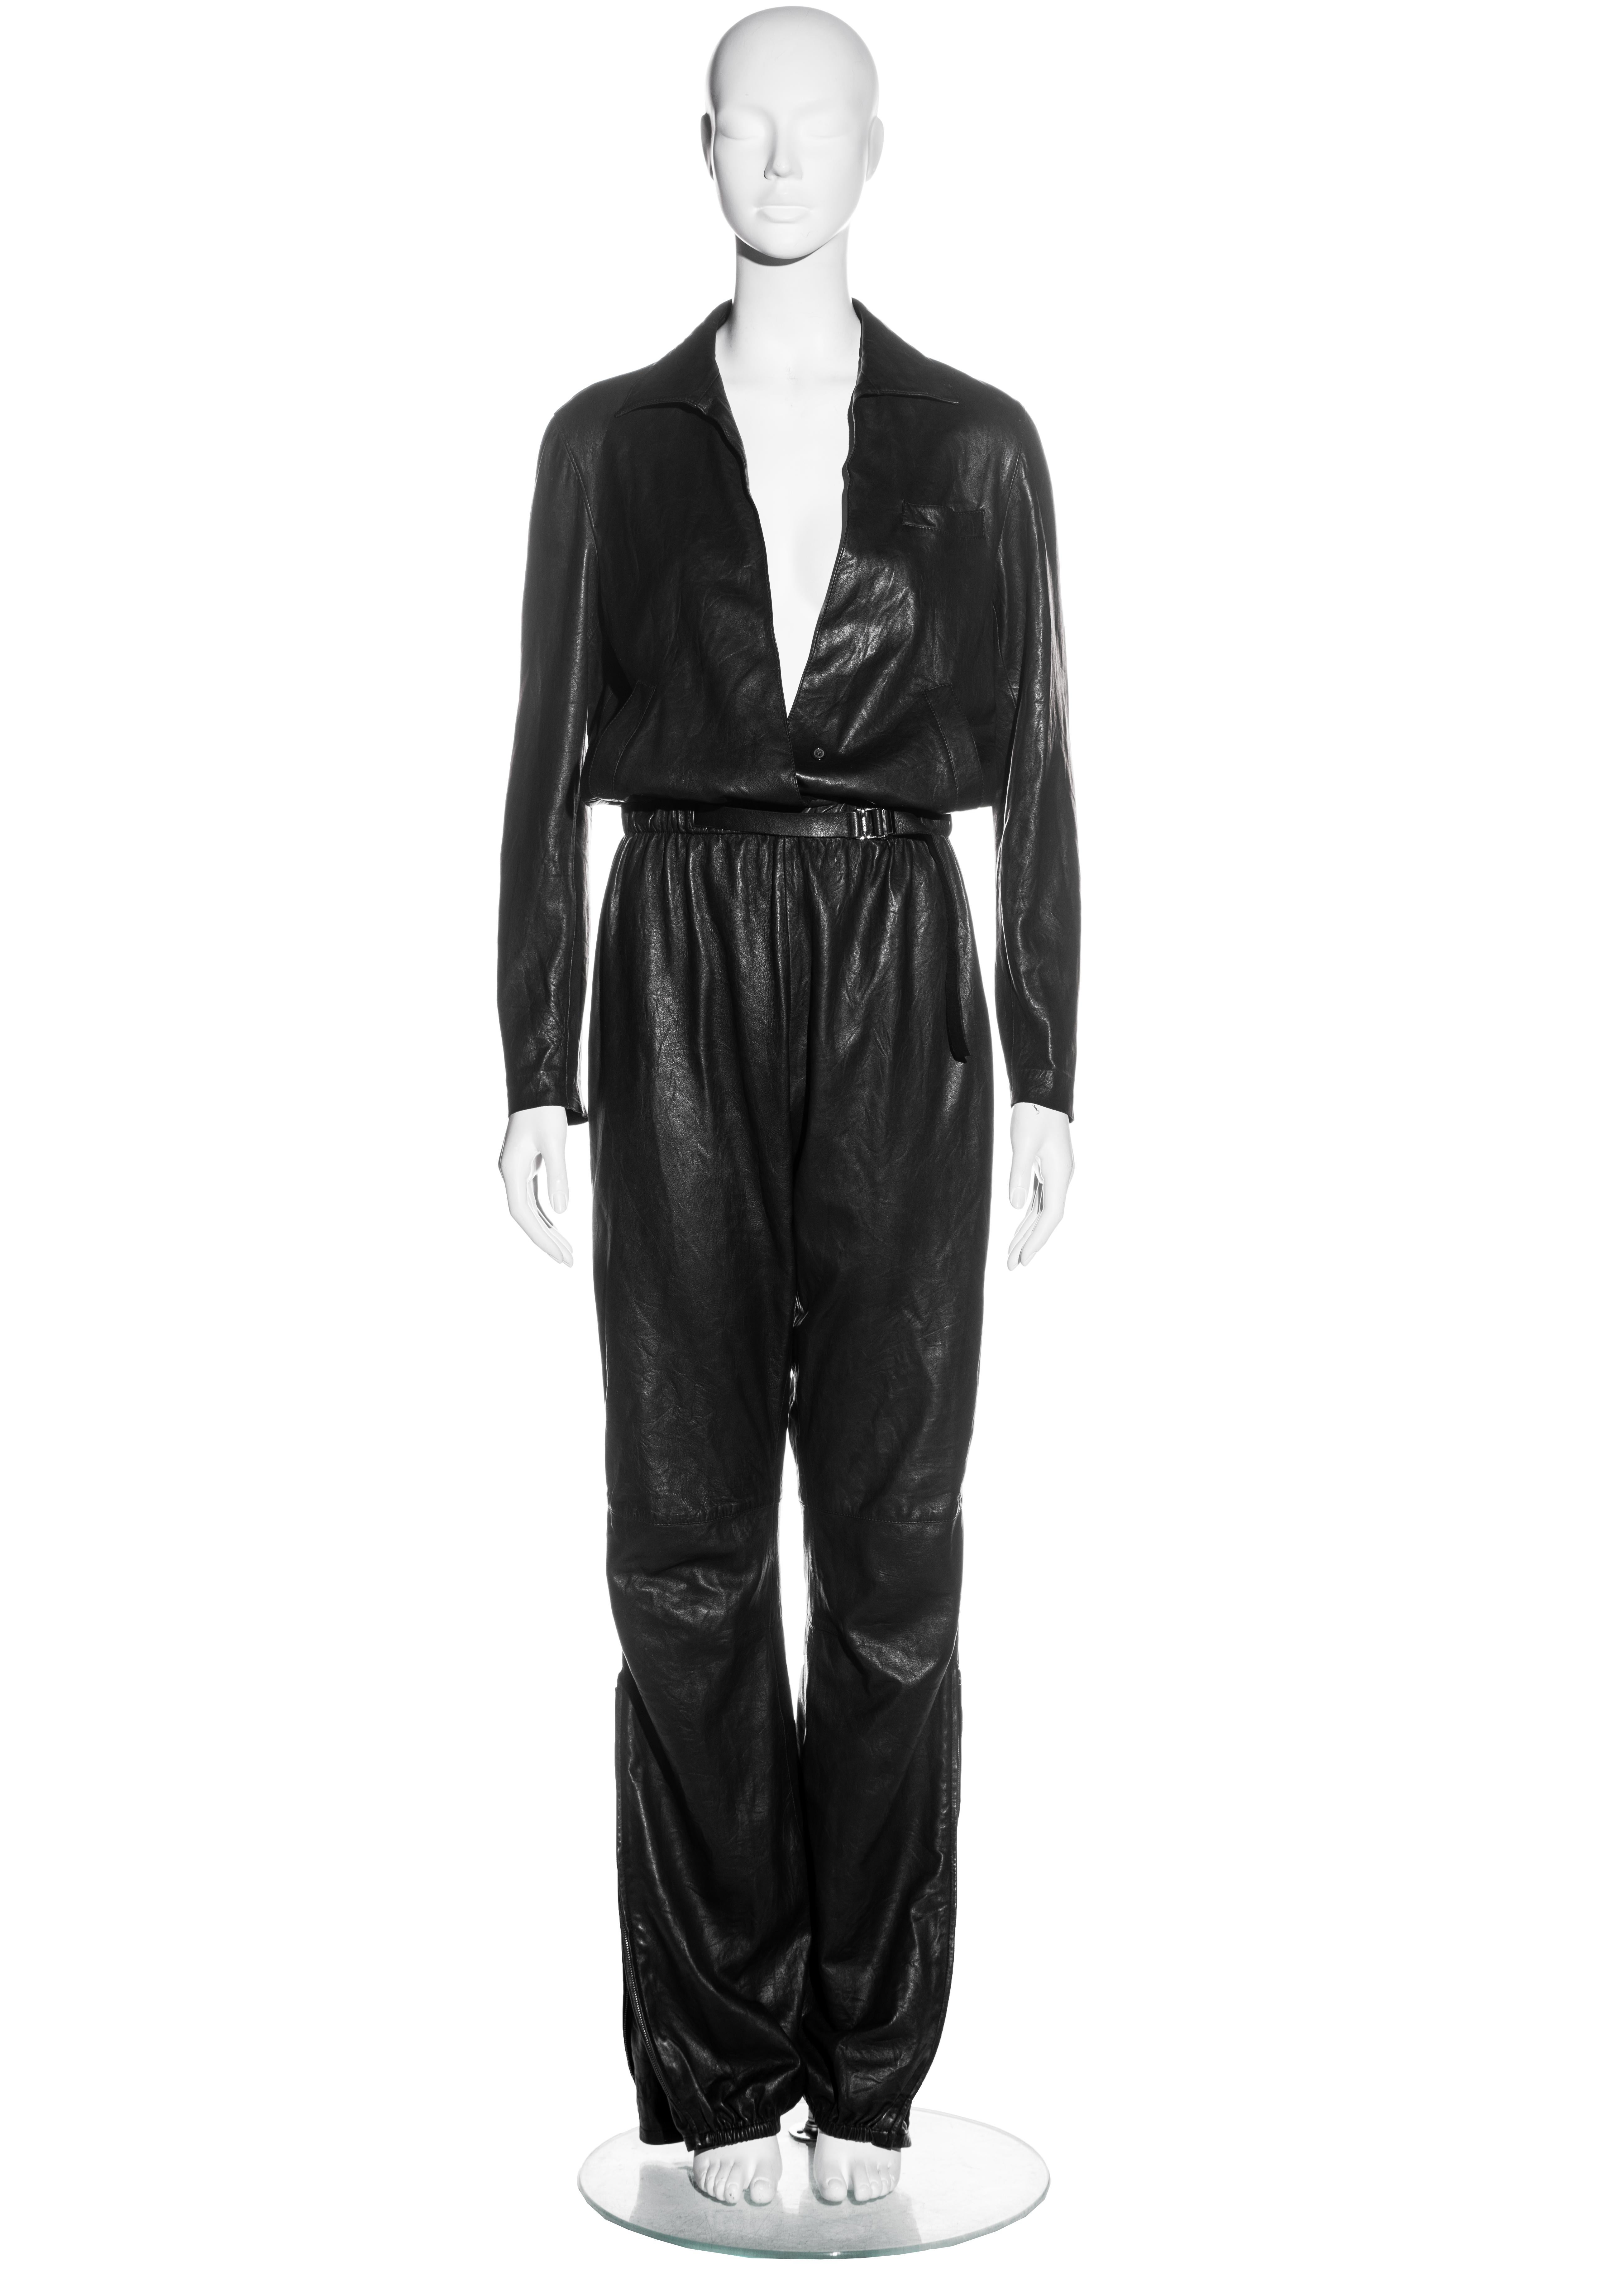 ▪ Gucci black leather jumpsuit
▪ Designed by Tom Ford
▪ Elastic at waistband and ankles 
▪ Etched 'Gucci' silver metal clasp at belt 
▪ Zips at ankles with long metal pulls 
▪ Low plunge with singular button fastening 
▪ IT 42 - FR 38 - UK 10 - US